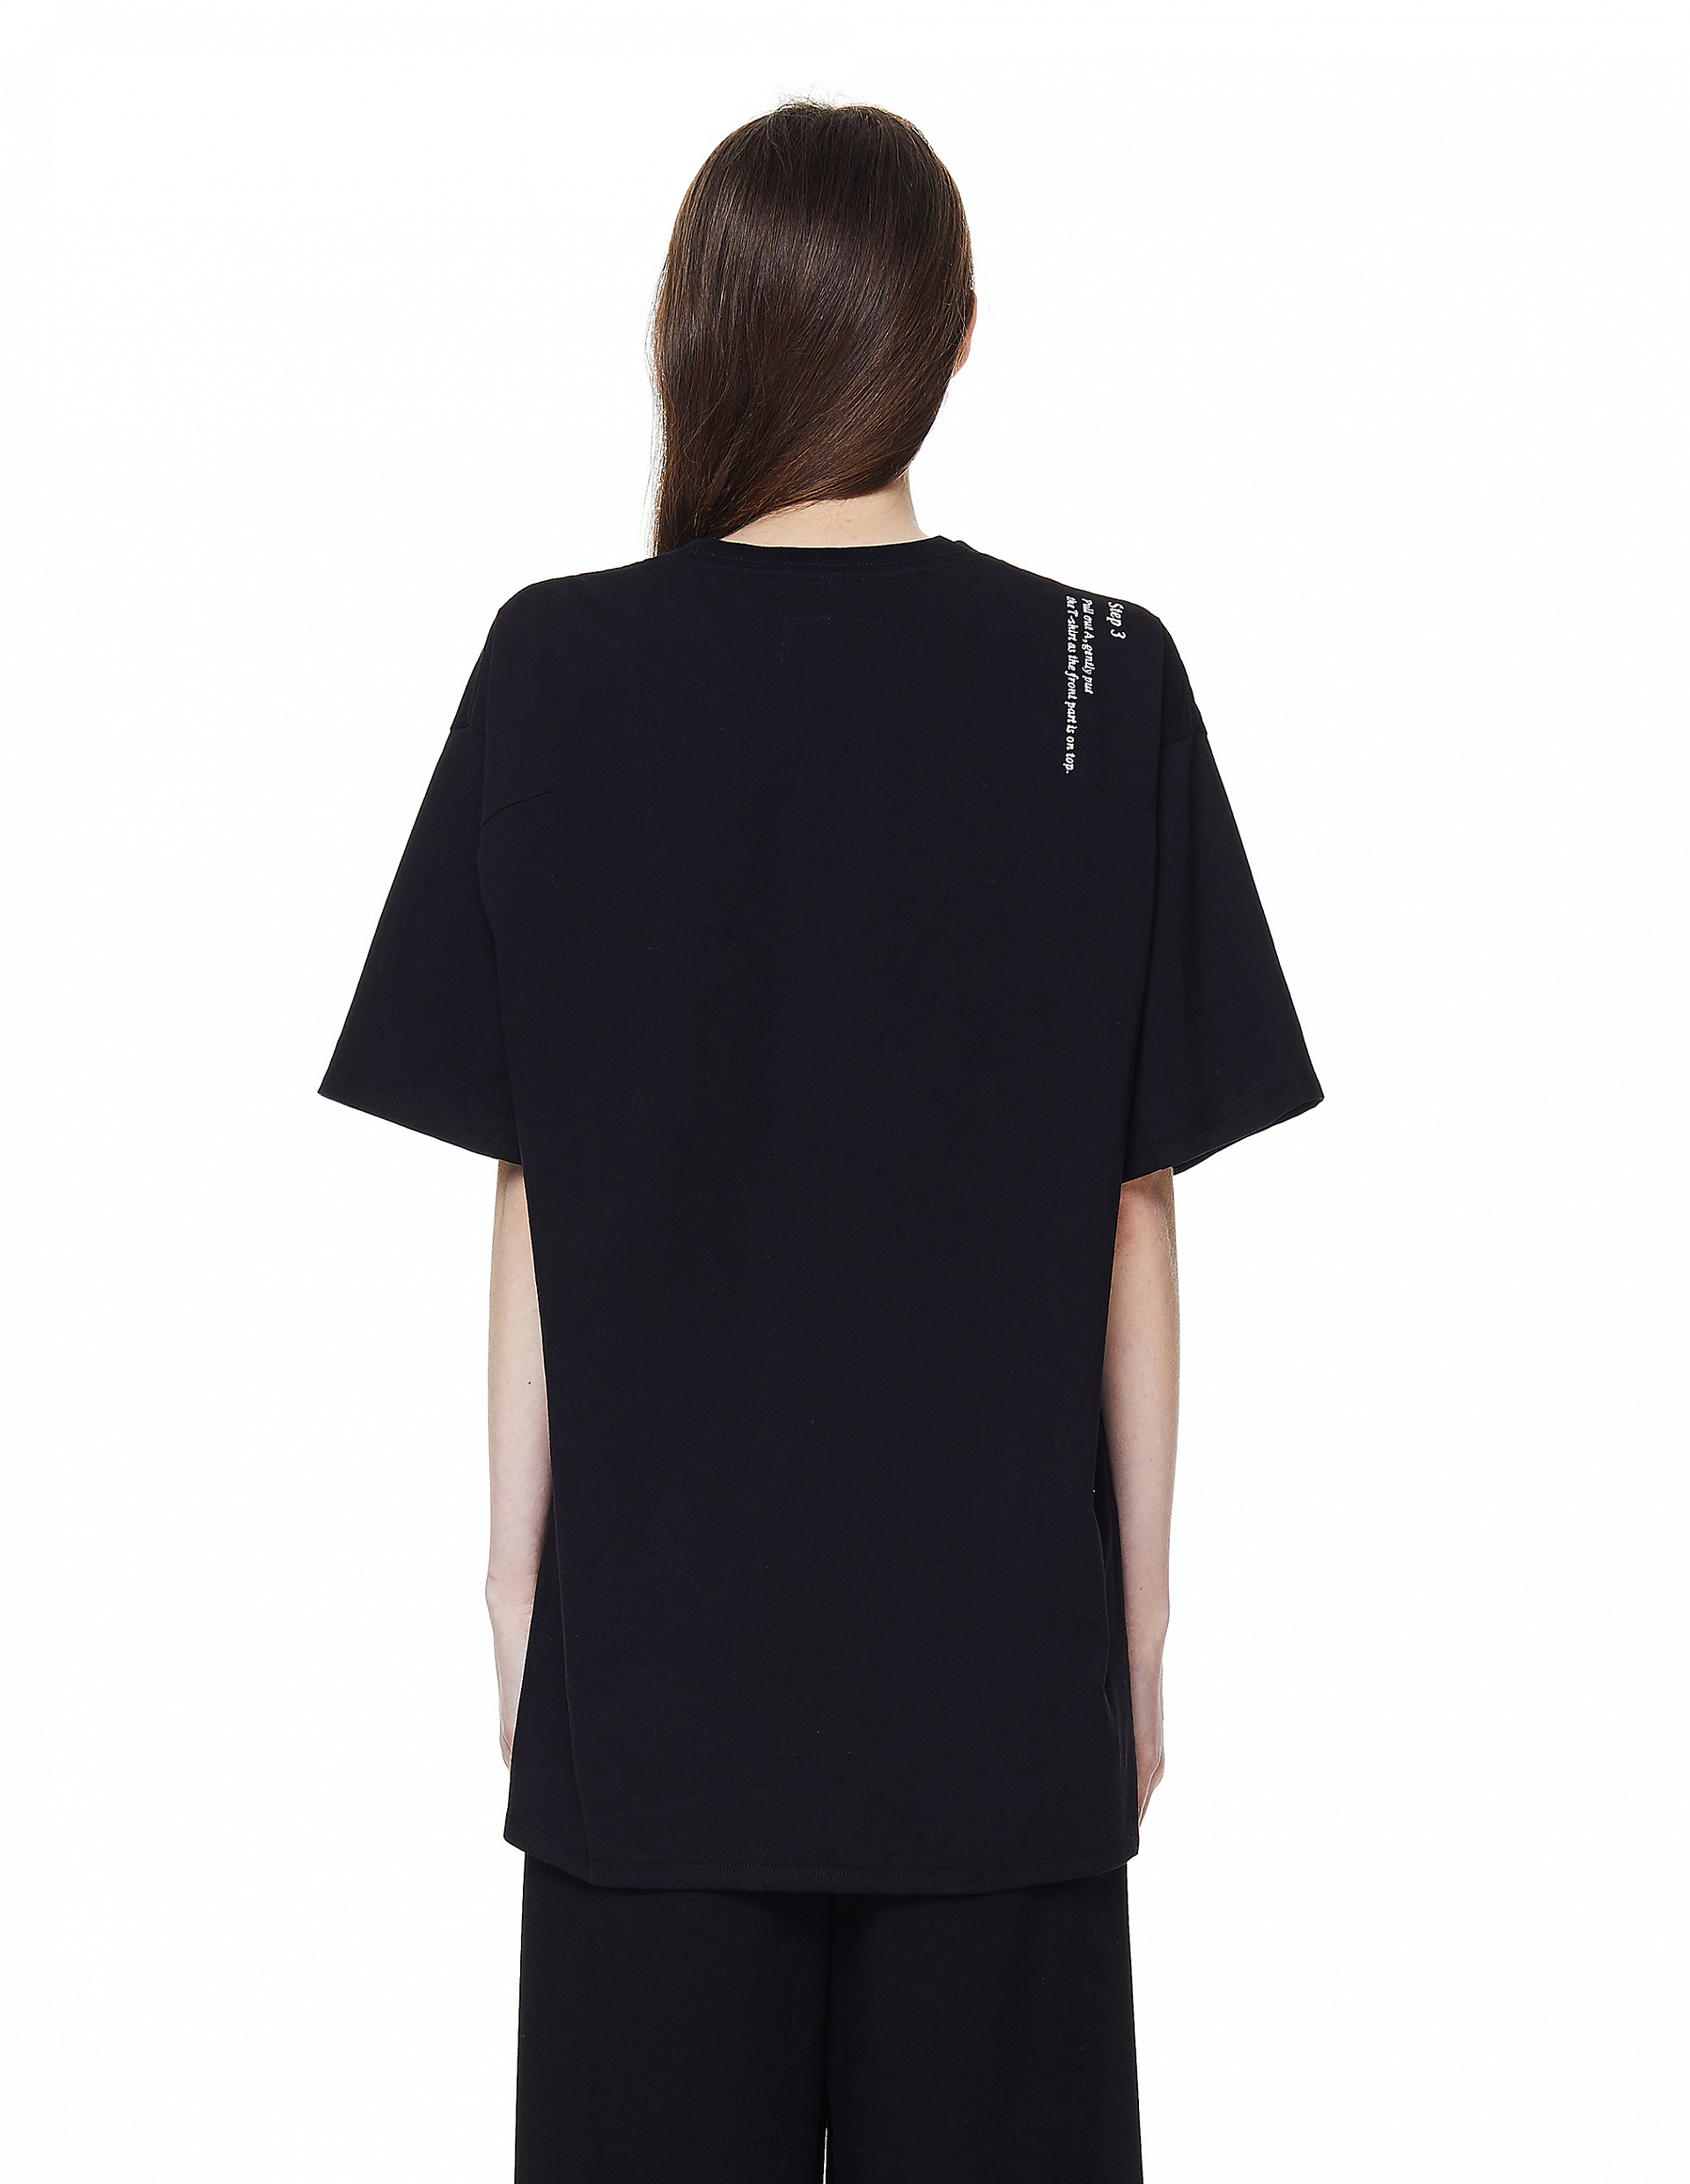 Buy Doublet women black instruction embroidered t-shirt for $160 online